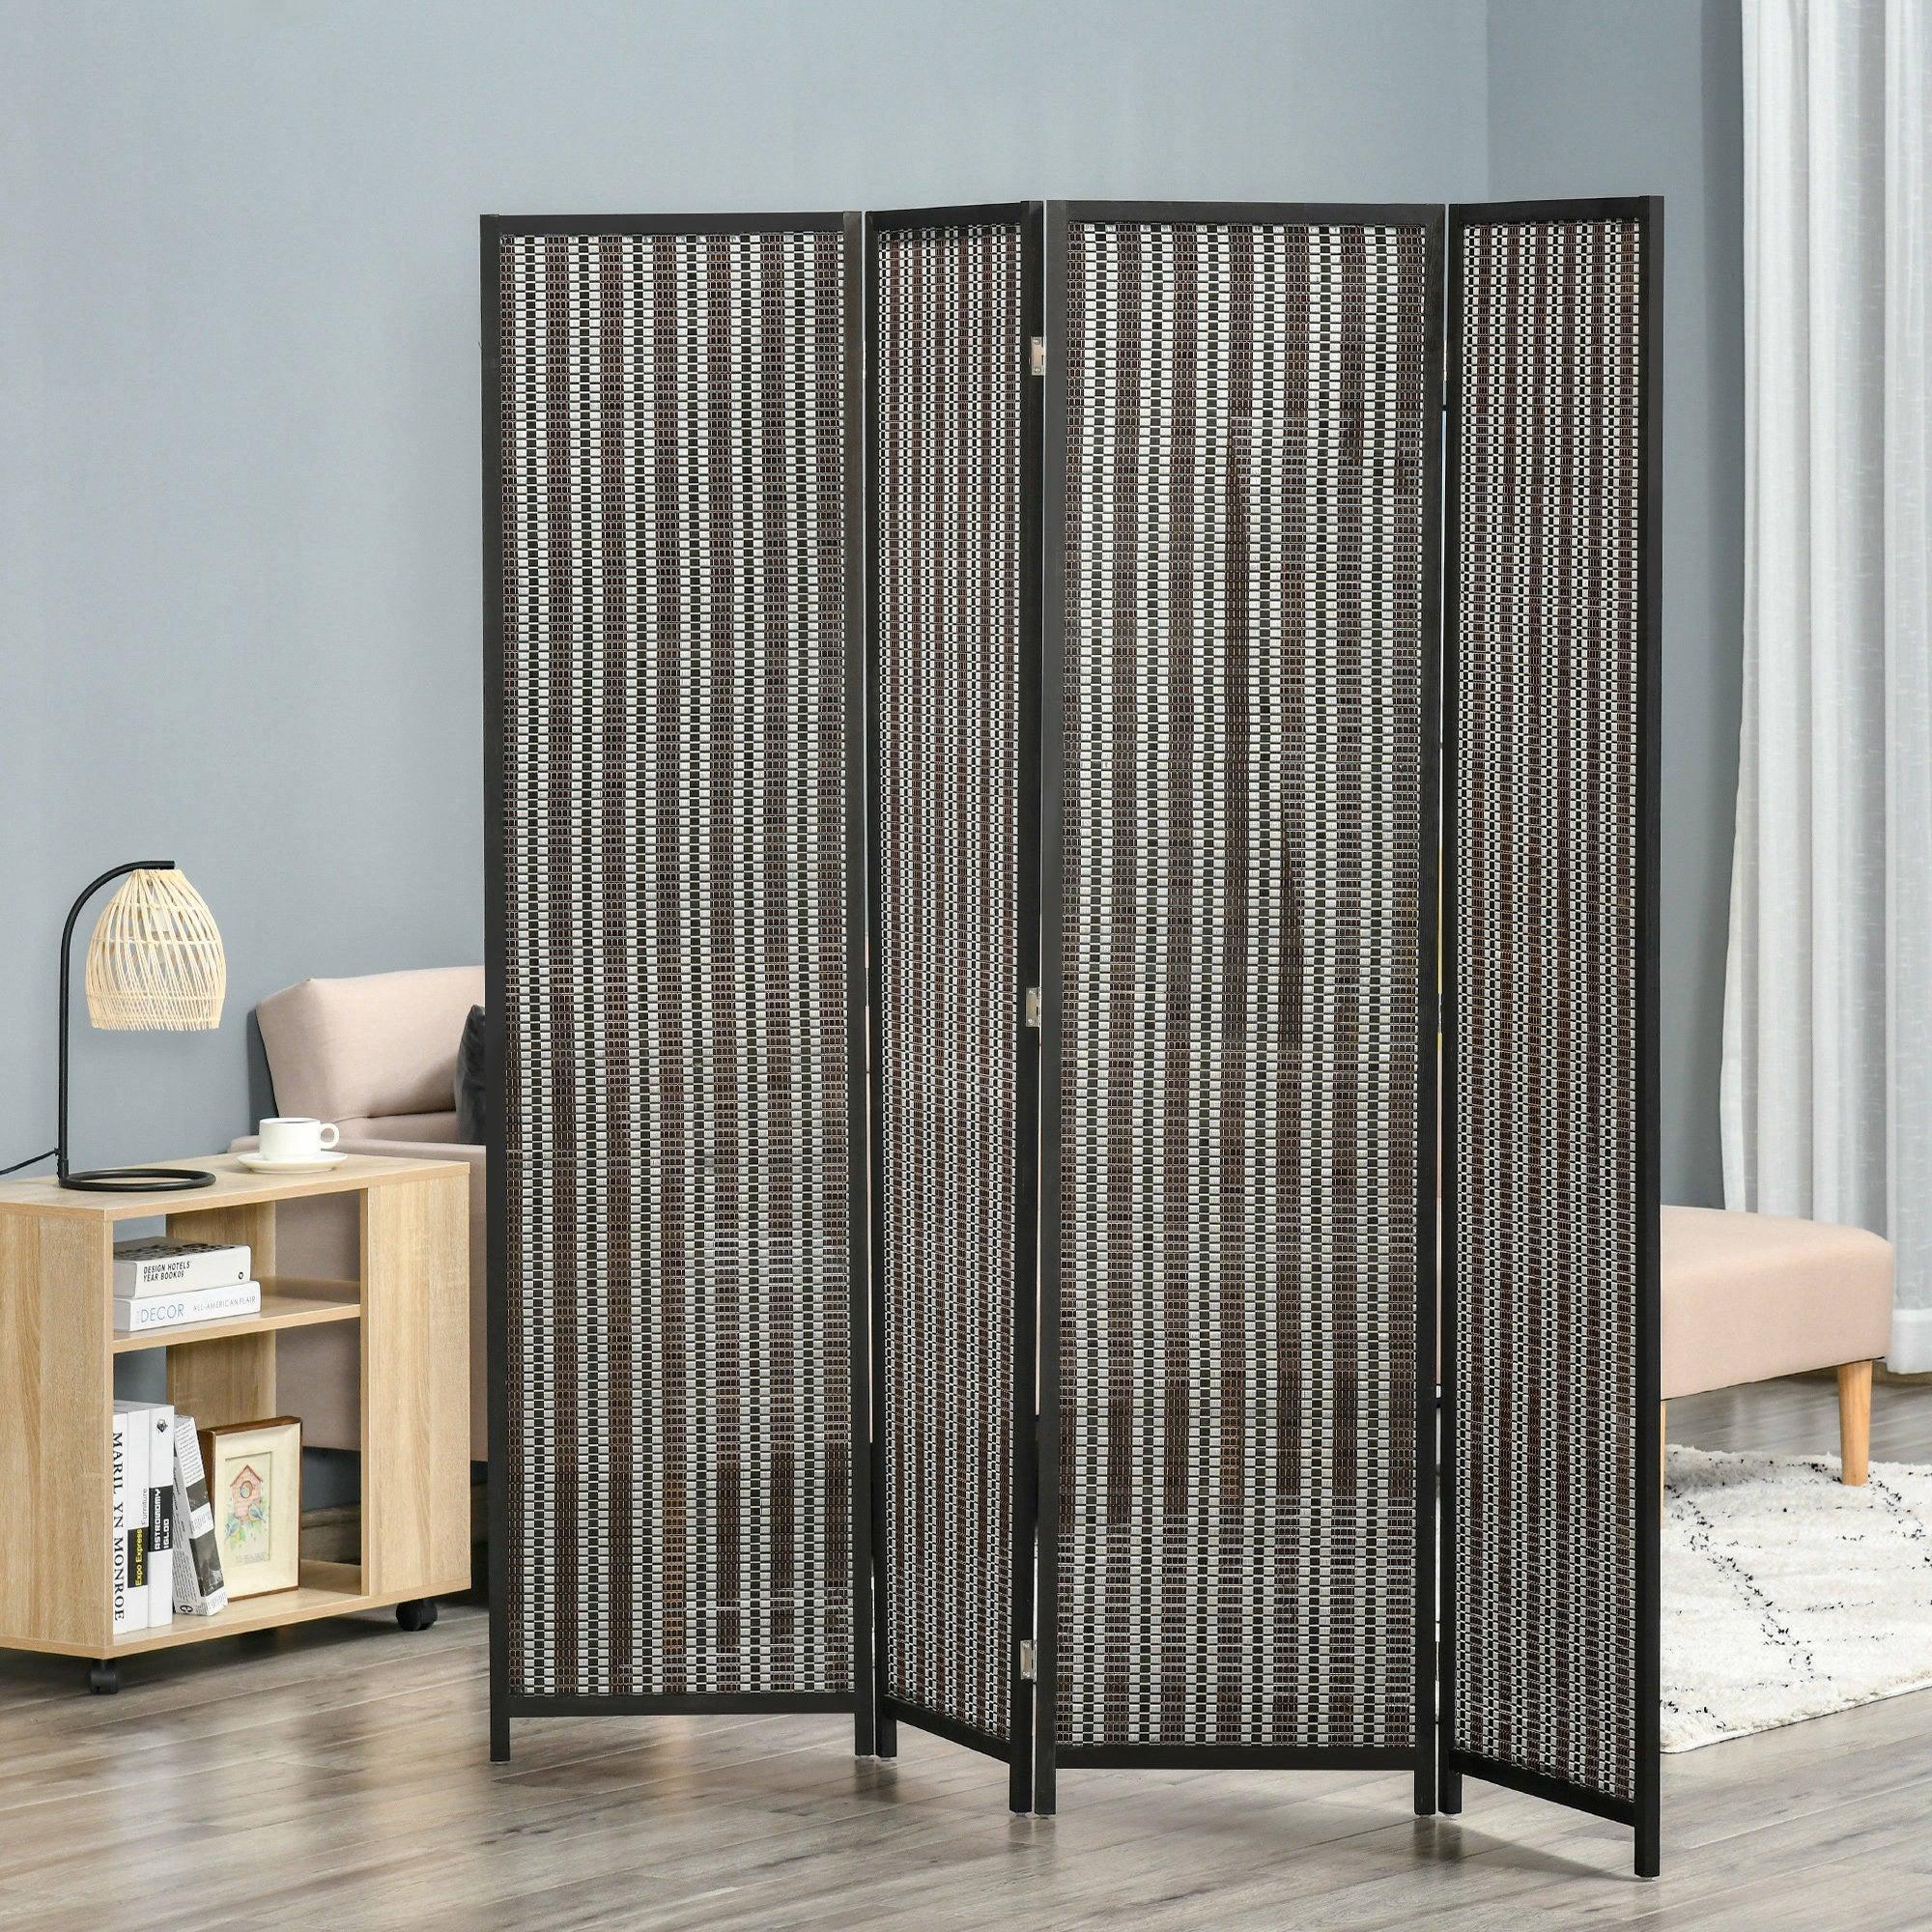 4 Panel Room Divider, 6 Ft Tall Indoor Portable Folding Privacy Screens